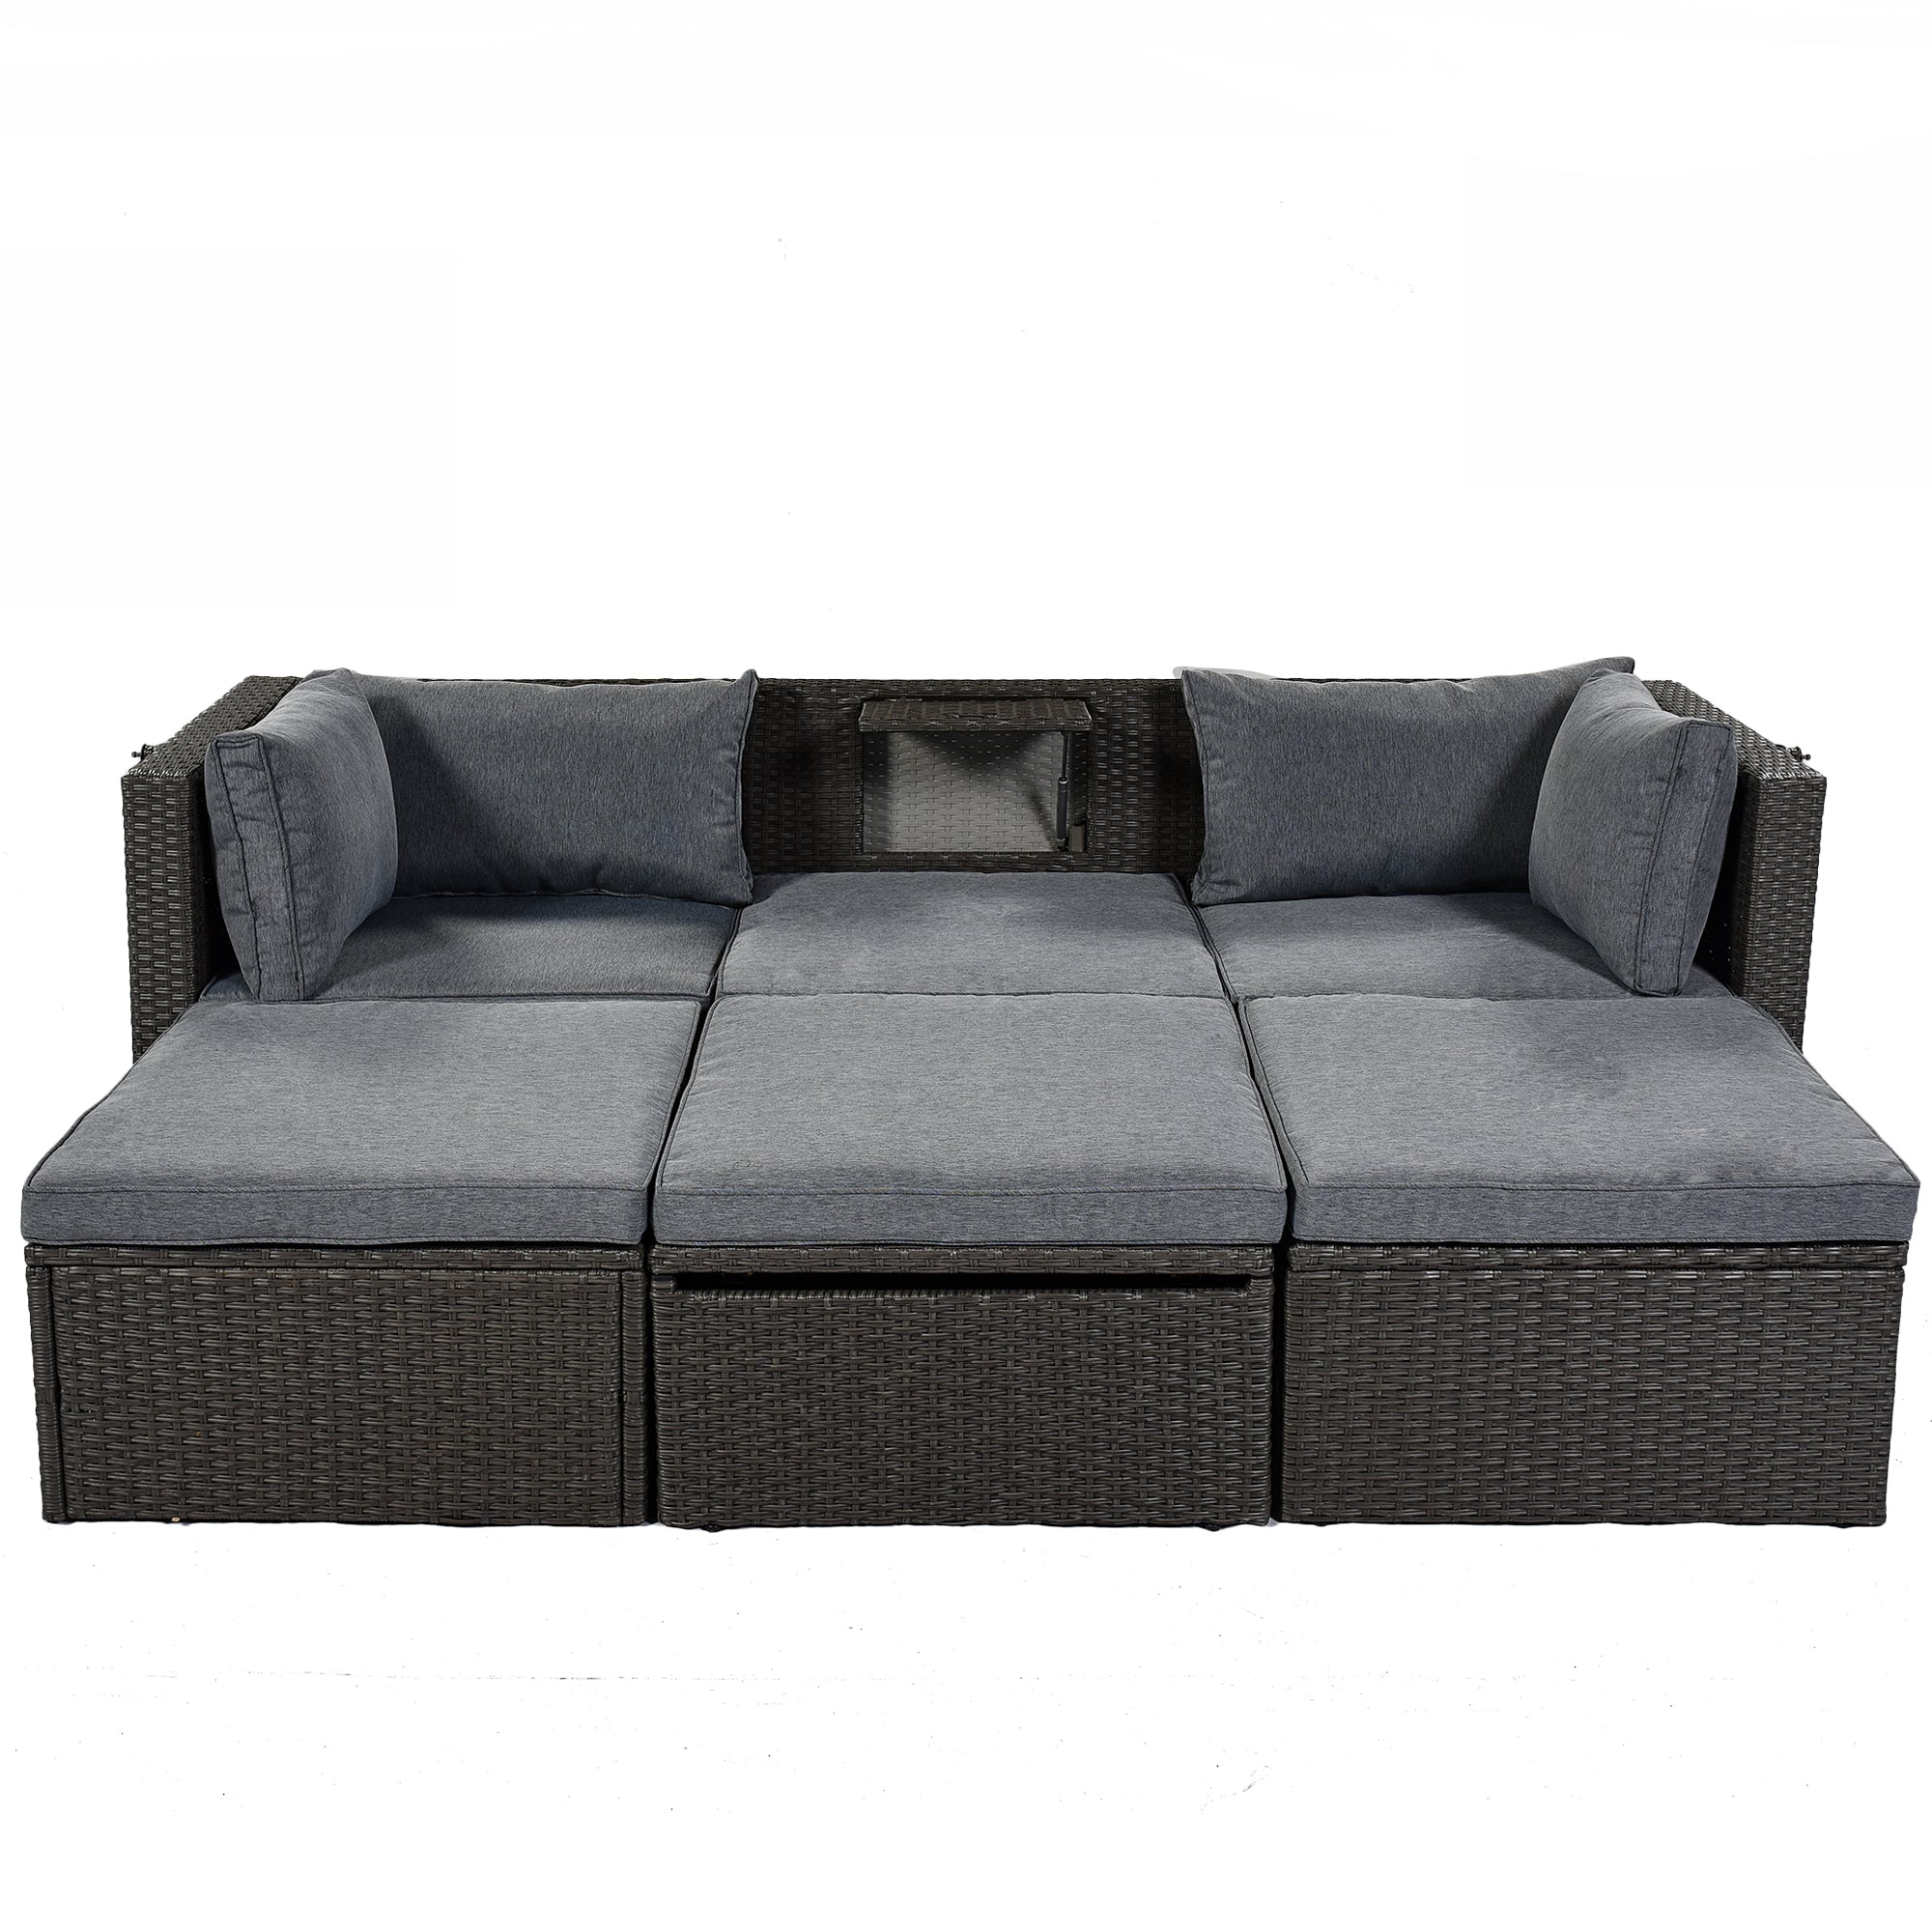 U Style Outdoor Patio Rectangle Daybed with gray-rattan